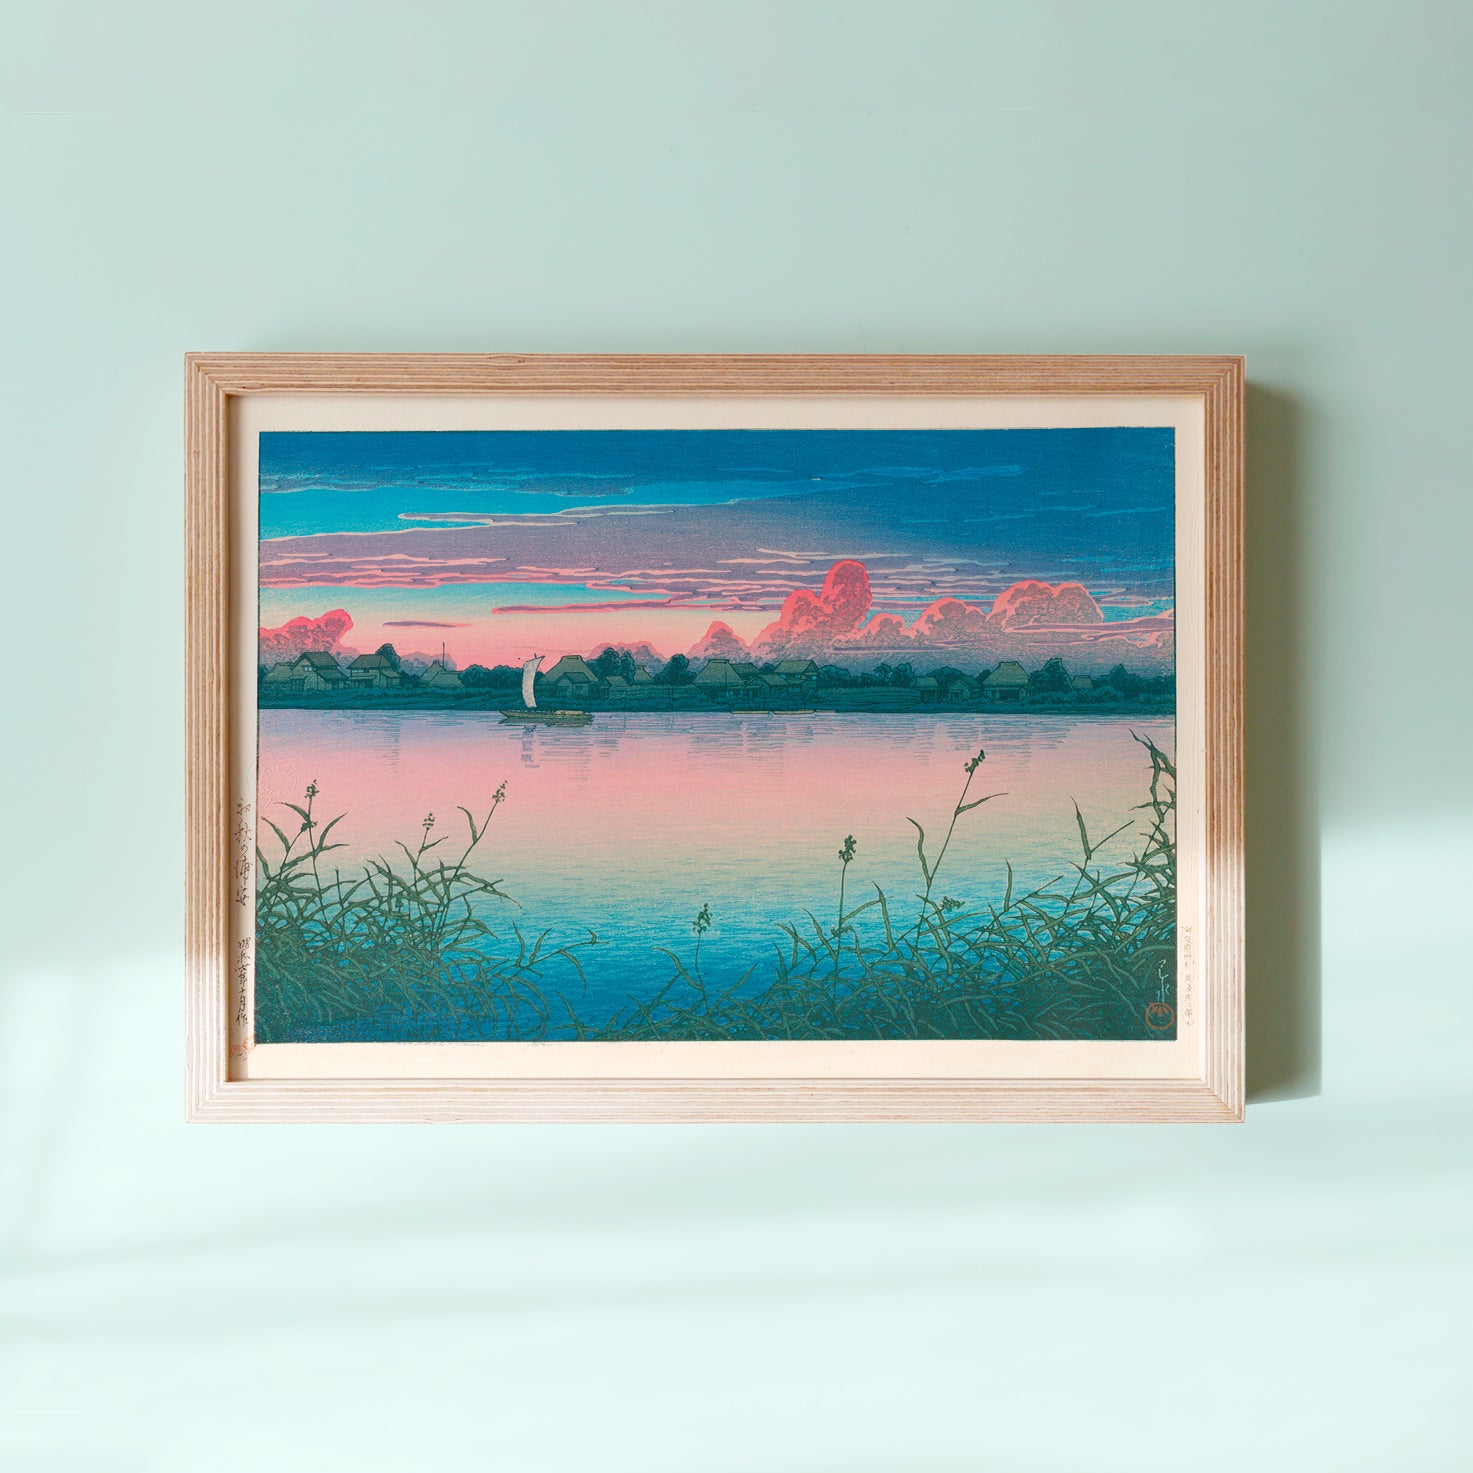 Framed Kawase Hasui's Japanese Art Poster: A breathtaking sunset painting reflecting on the tranquil water